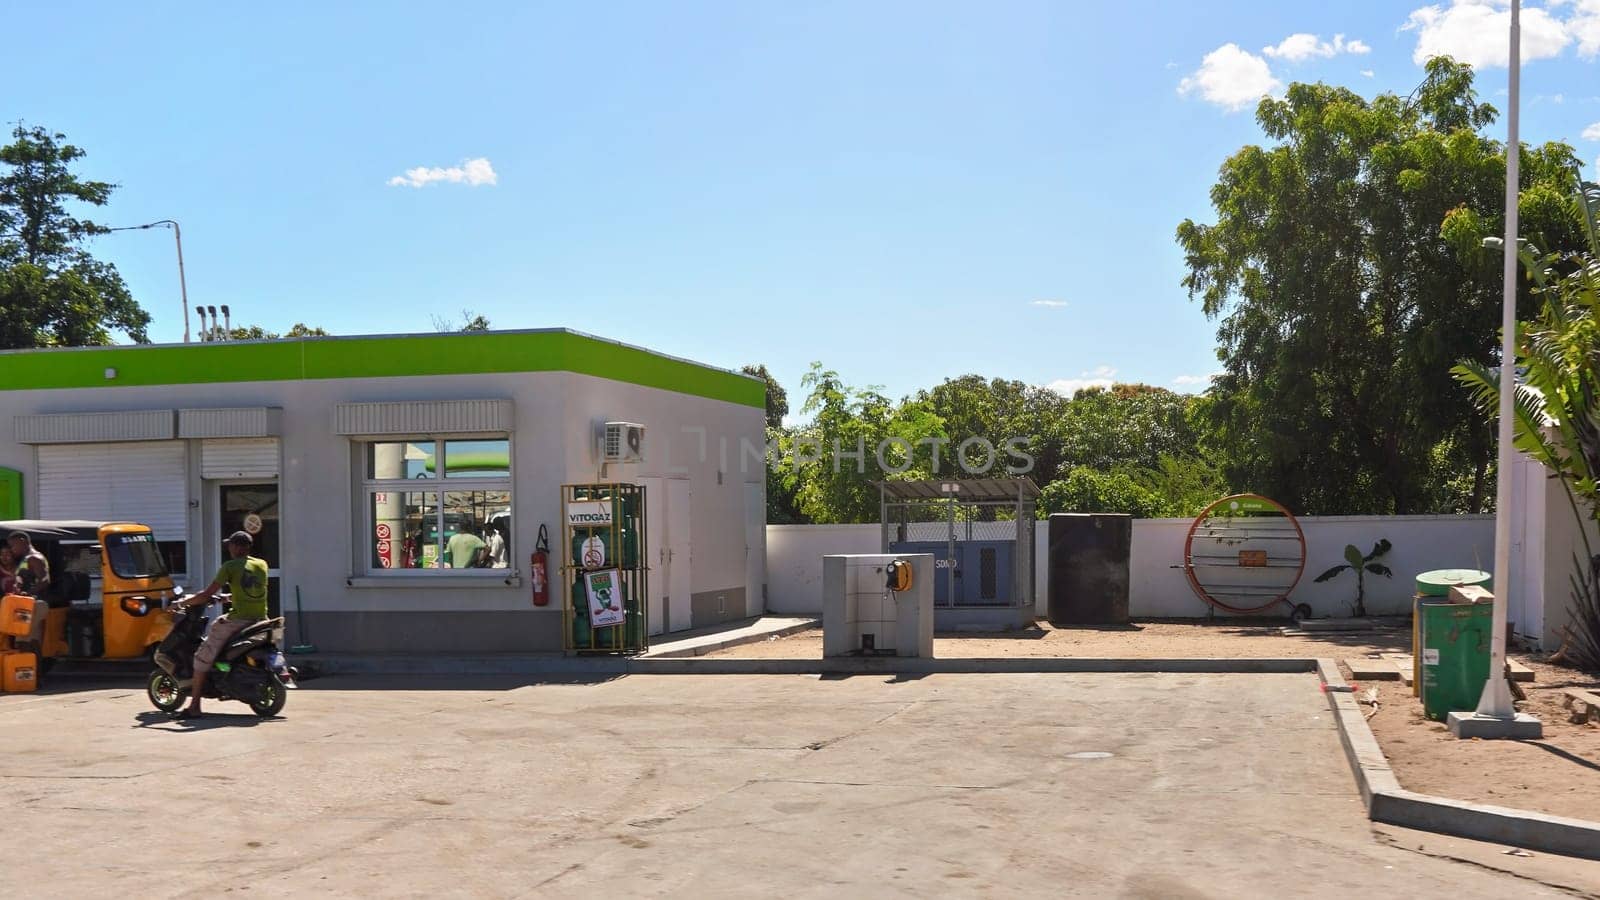 Sakaraha, Madagascar - May 05, 2019: Typical gas station (green Galana brand) at Madagascar on sunny day. Cars/fuel is expensive for locals, stations are used mostly for large trucks / small scooters